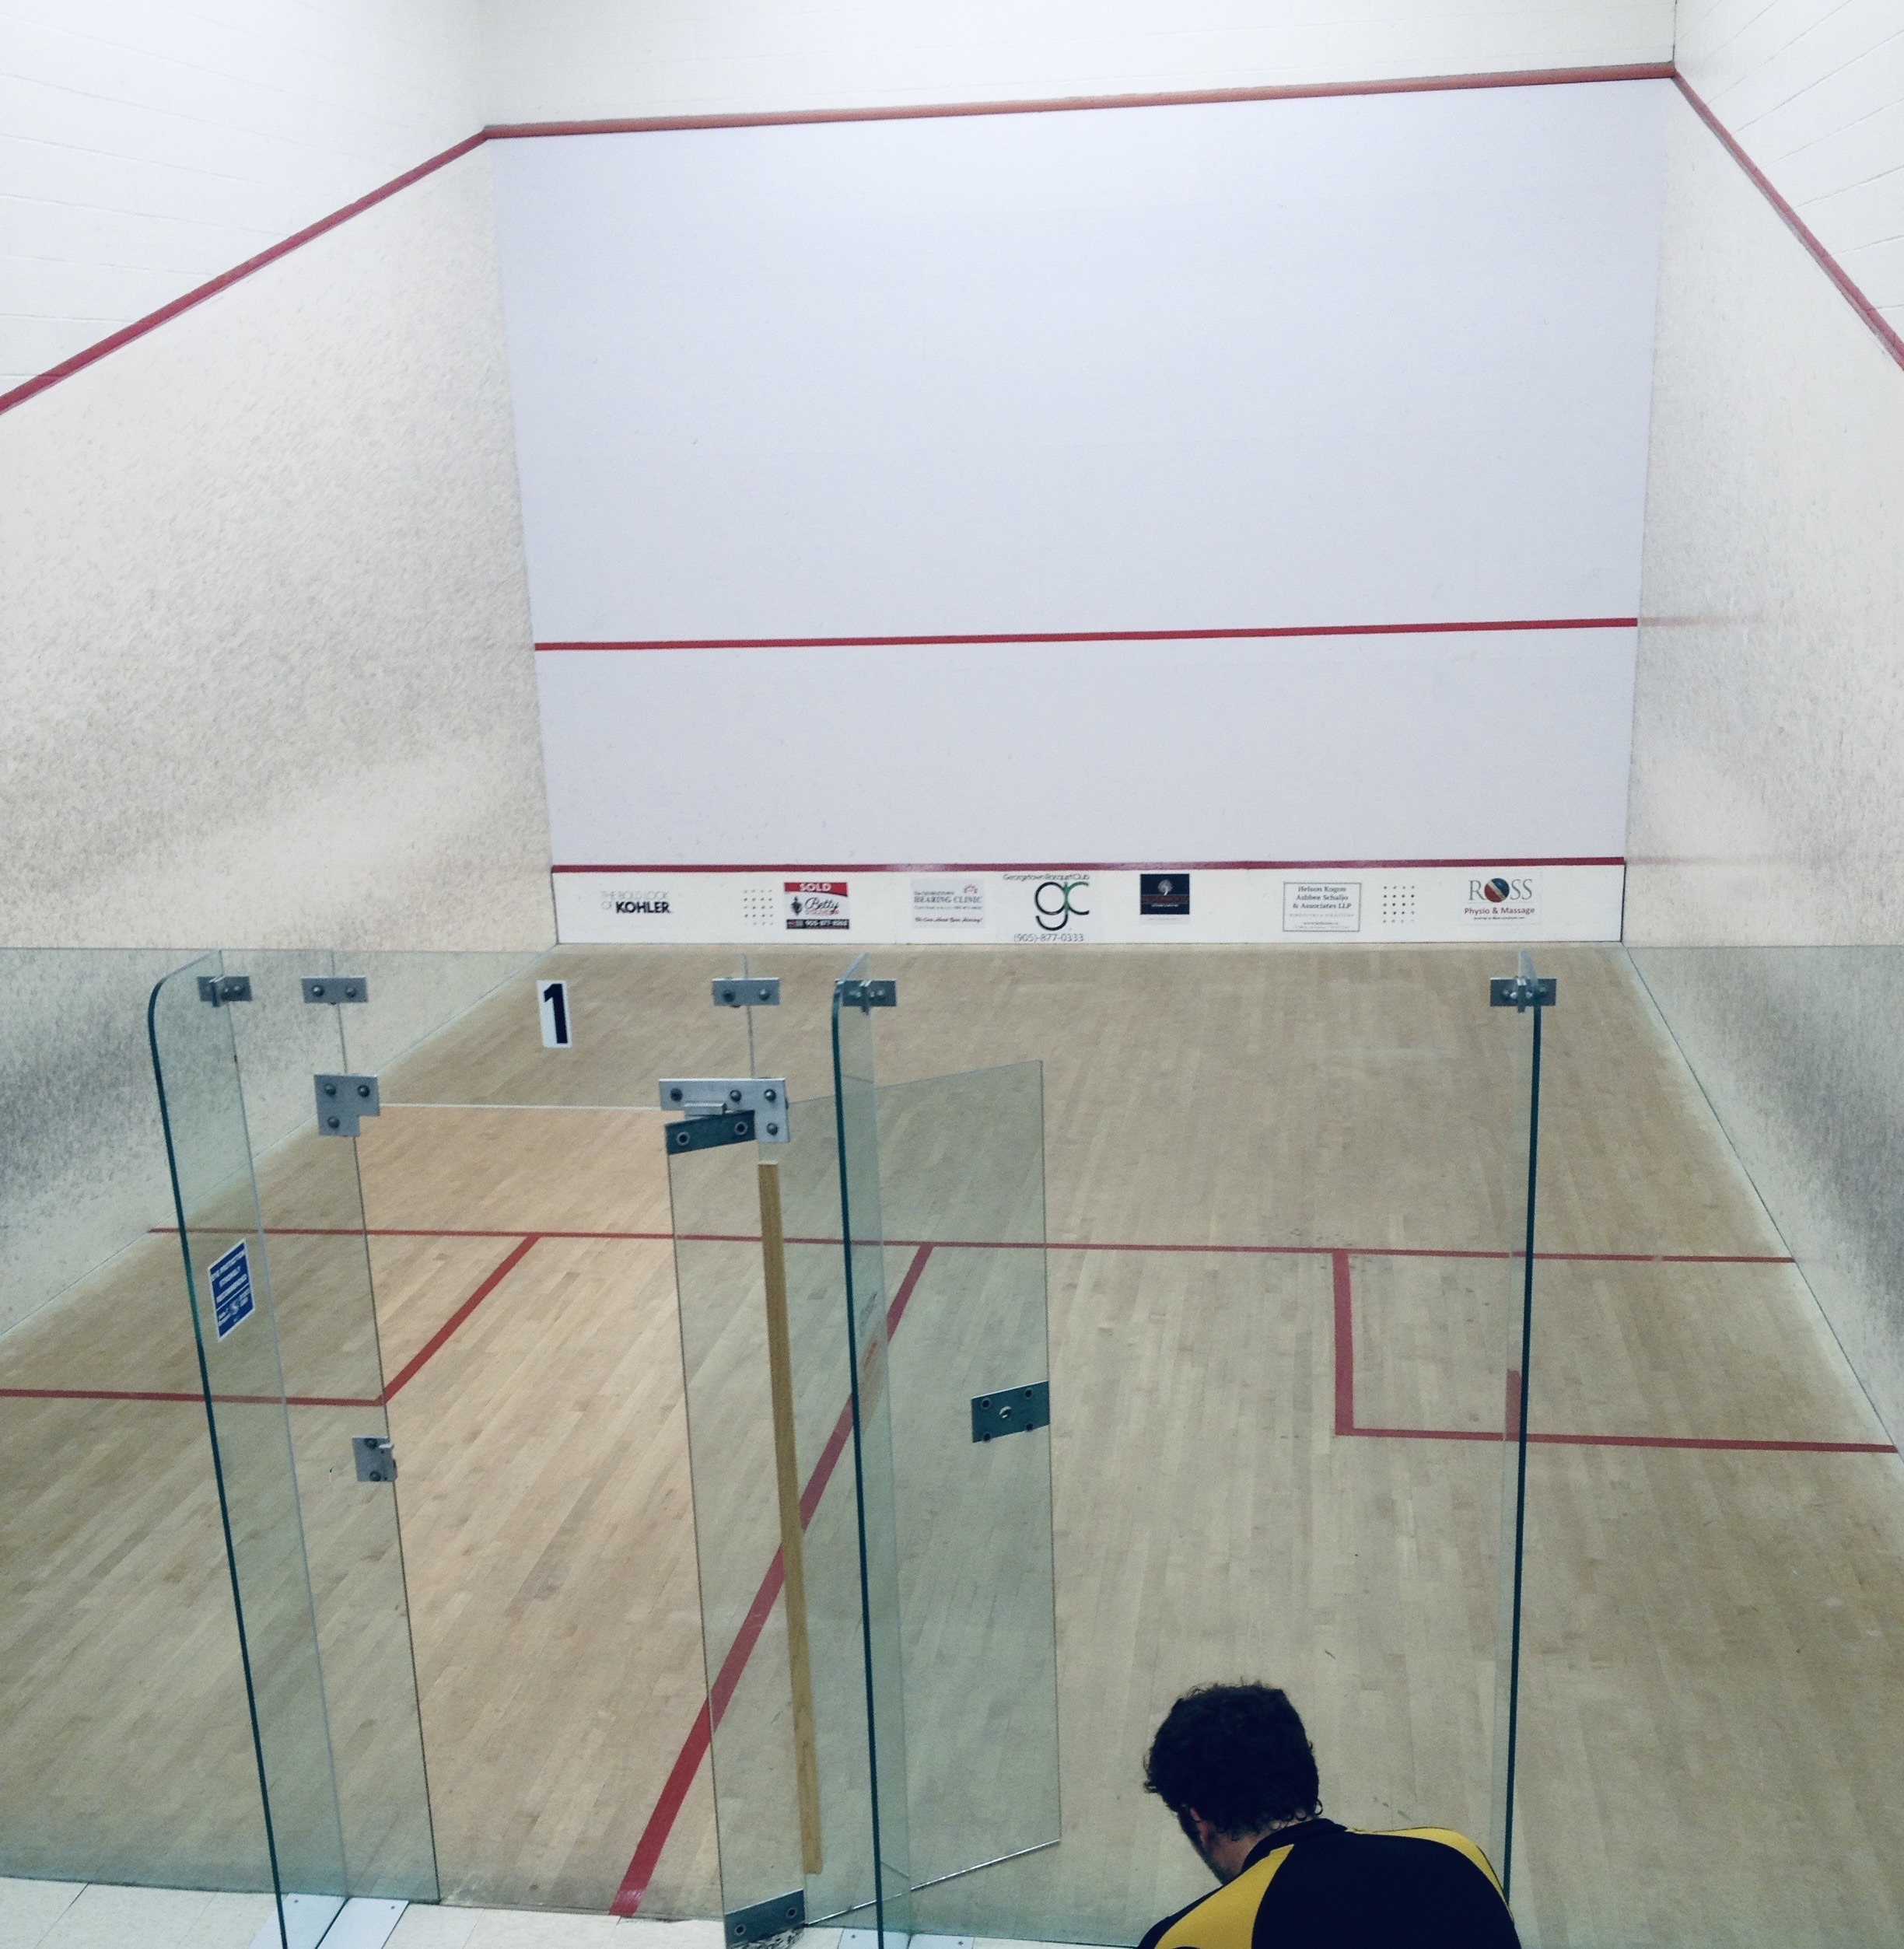 can you play squash by yourself?